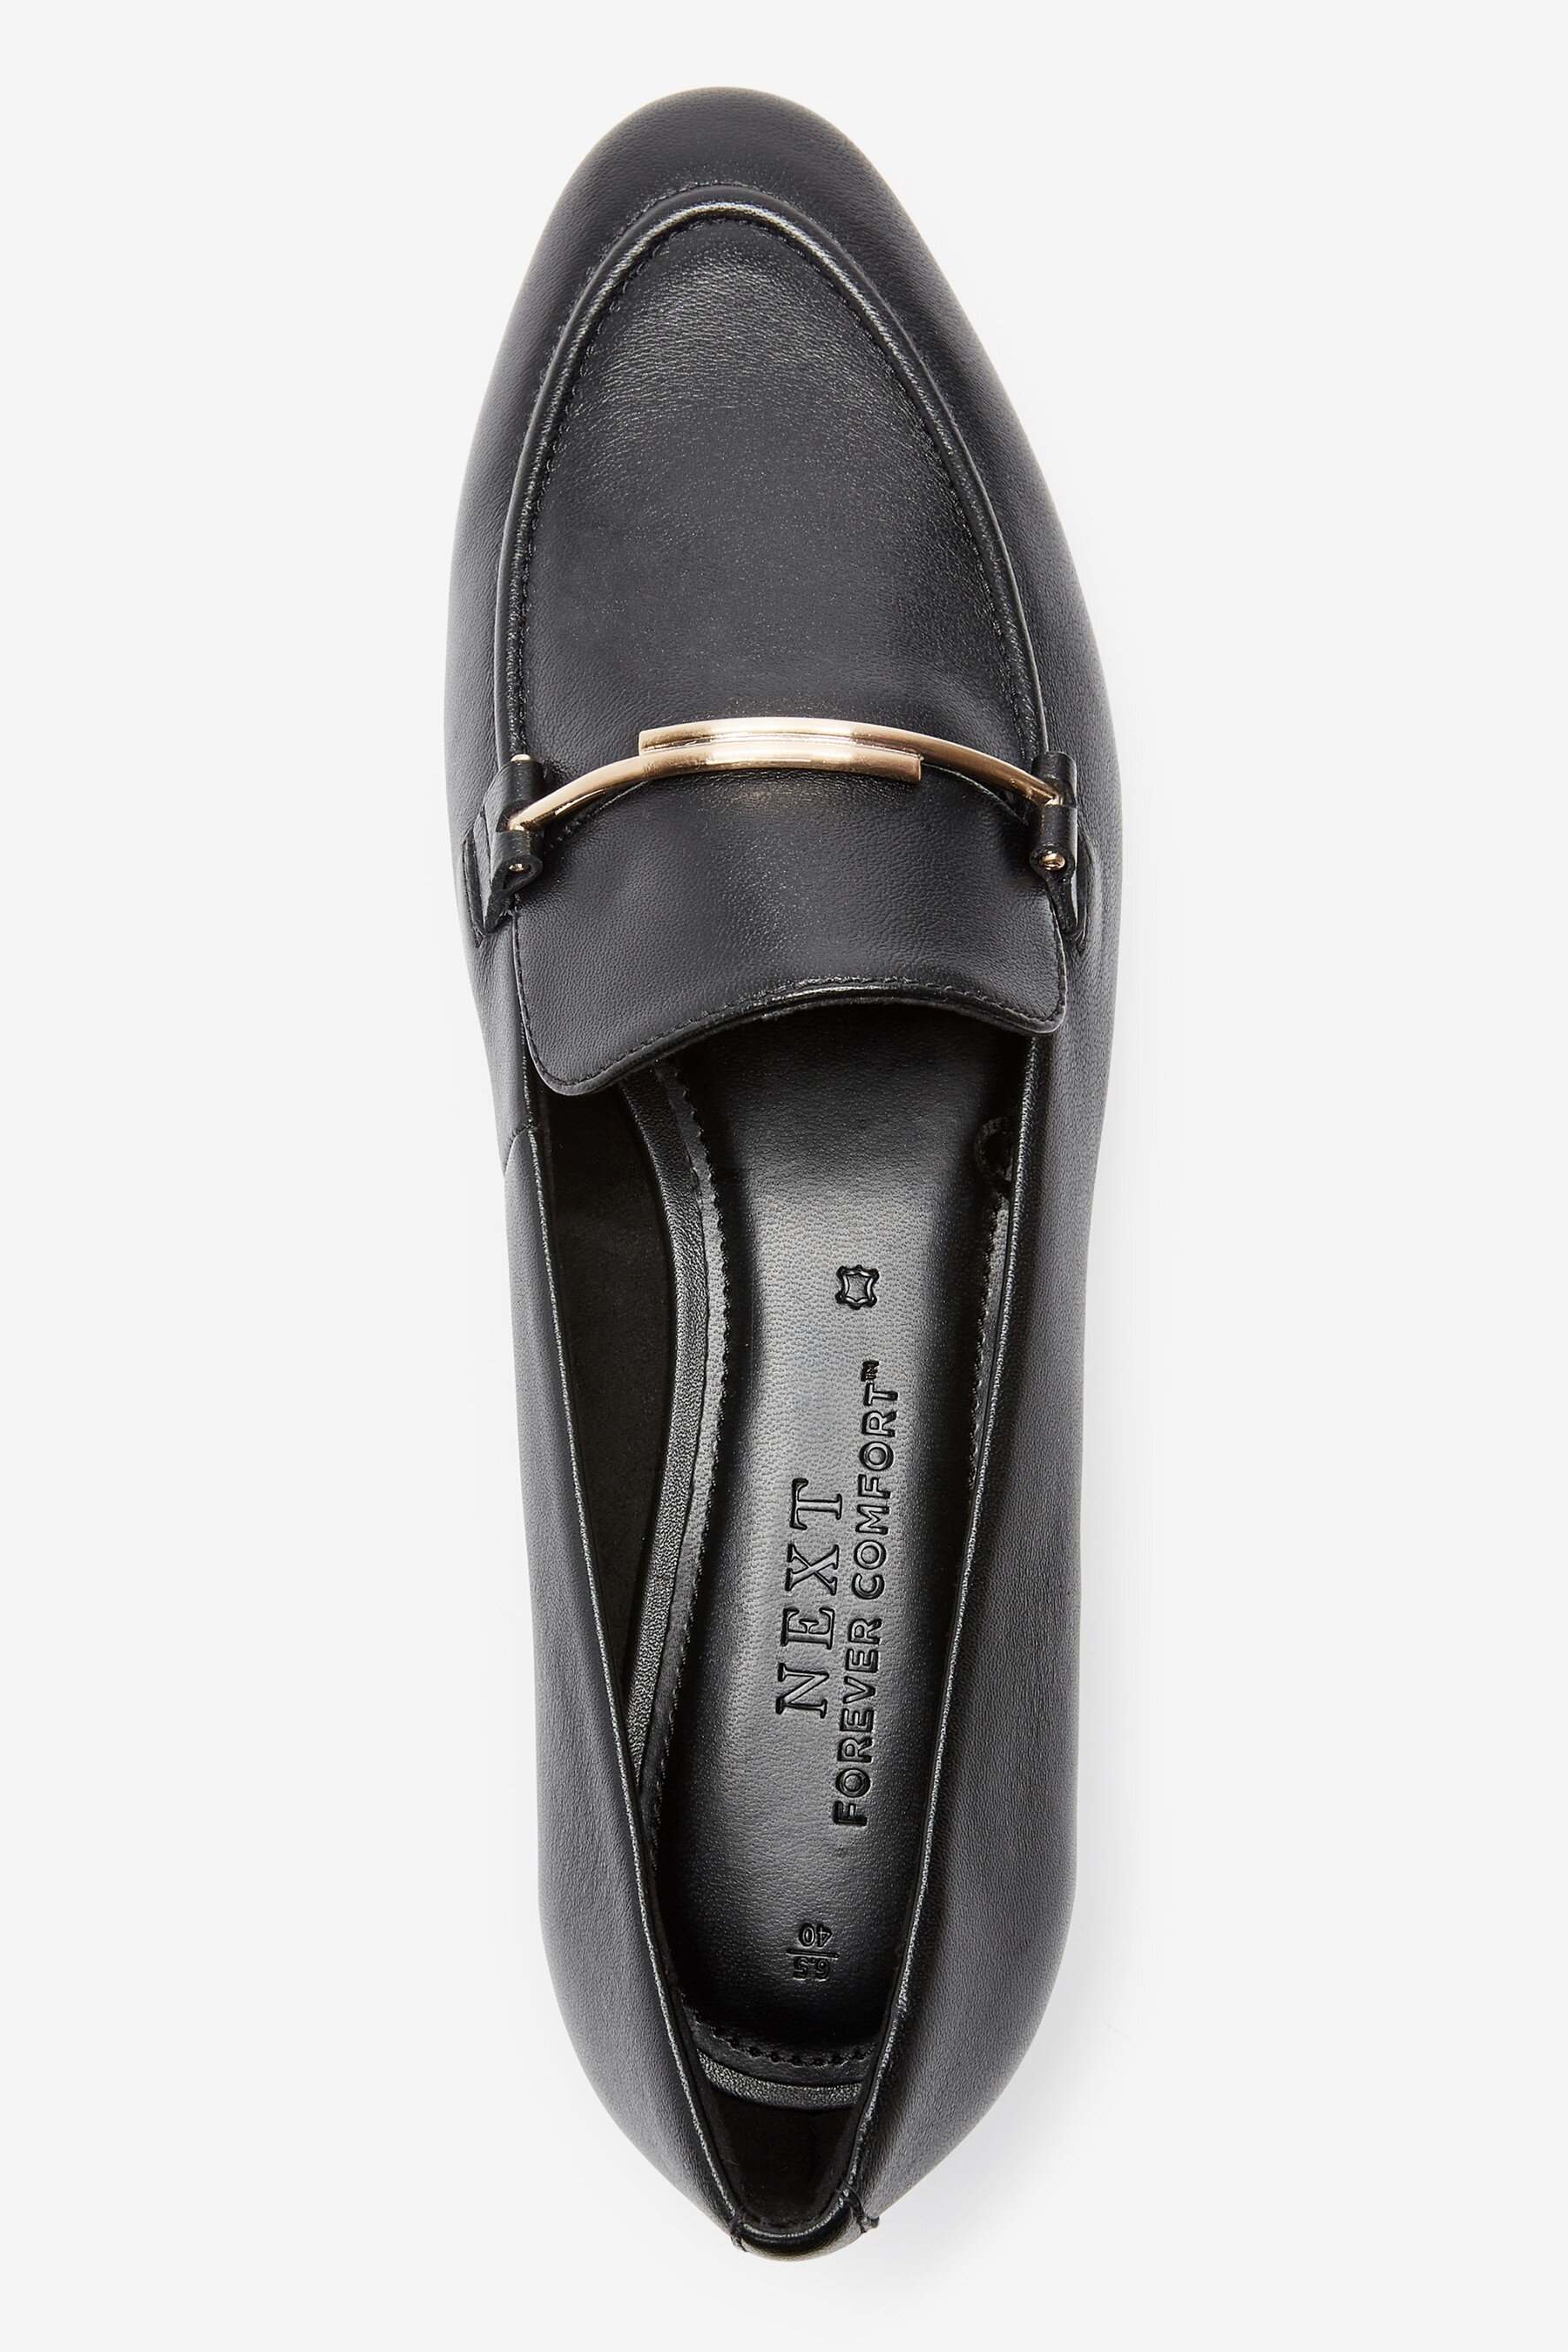 Loafers, £48, Next